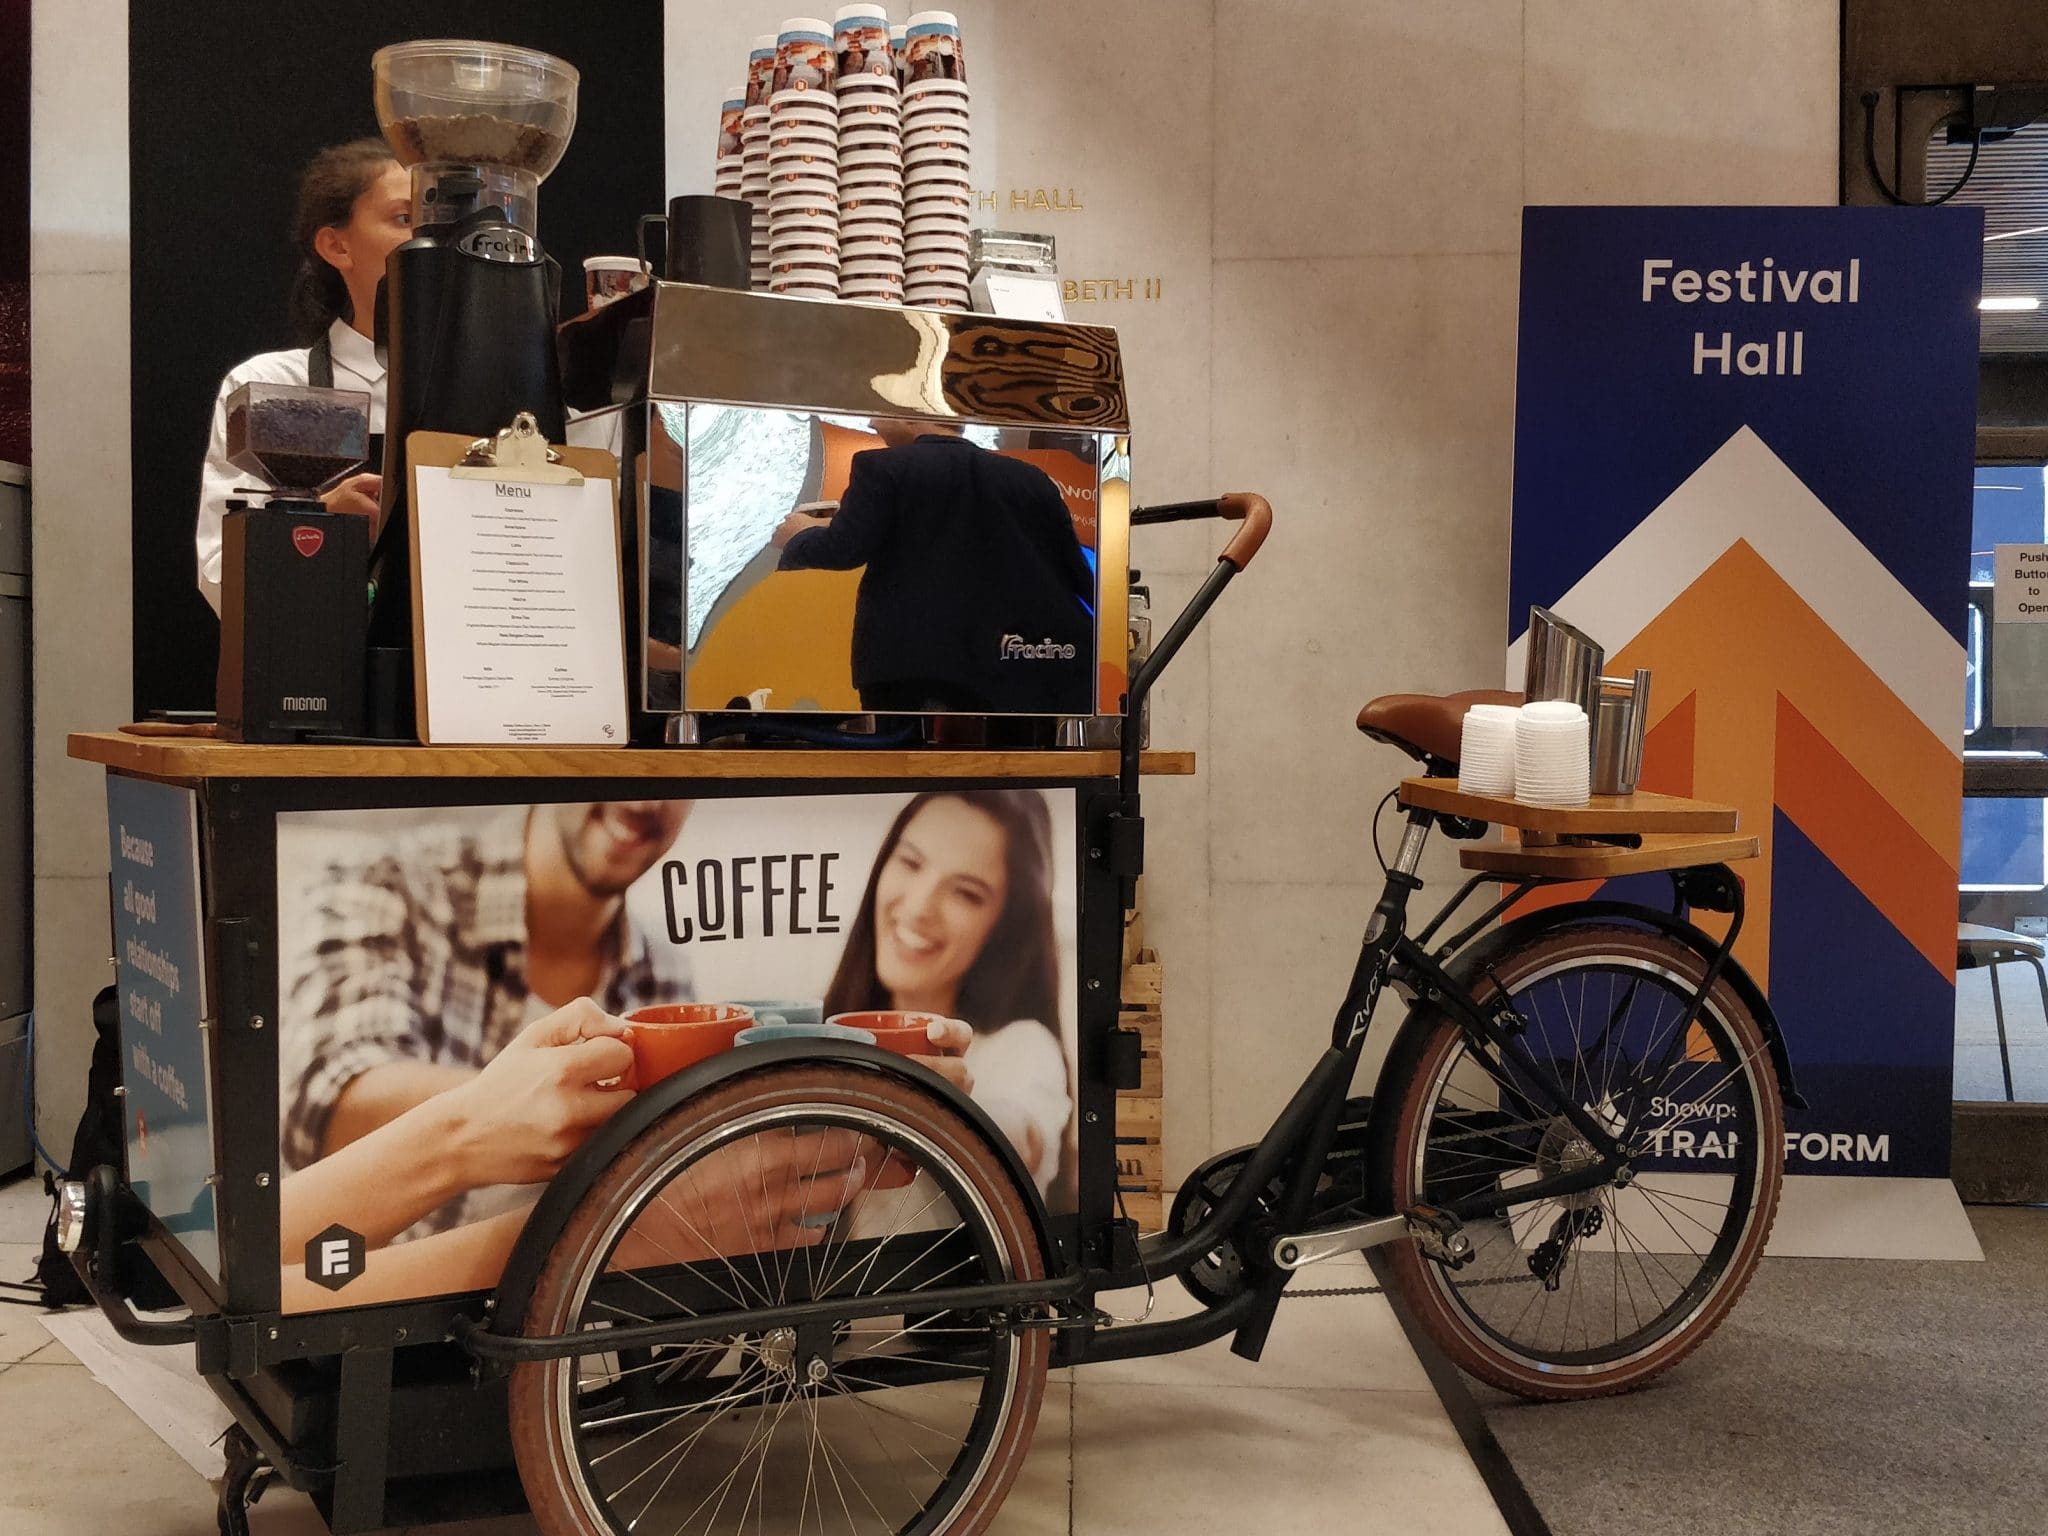 Wooden coffee bike at festival hall event